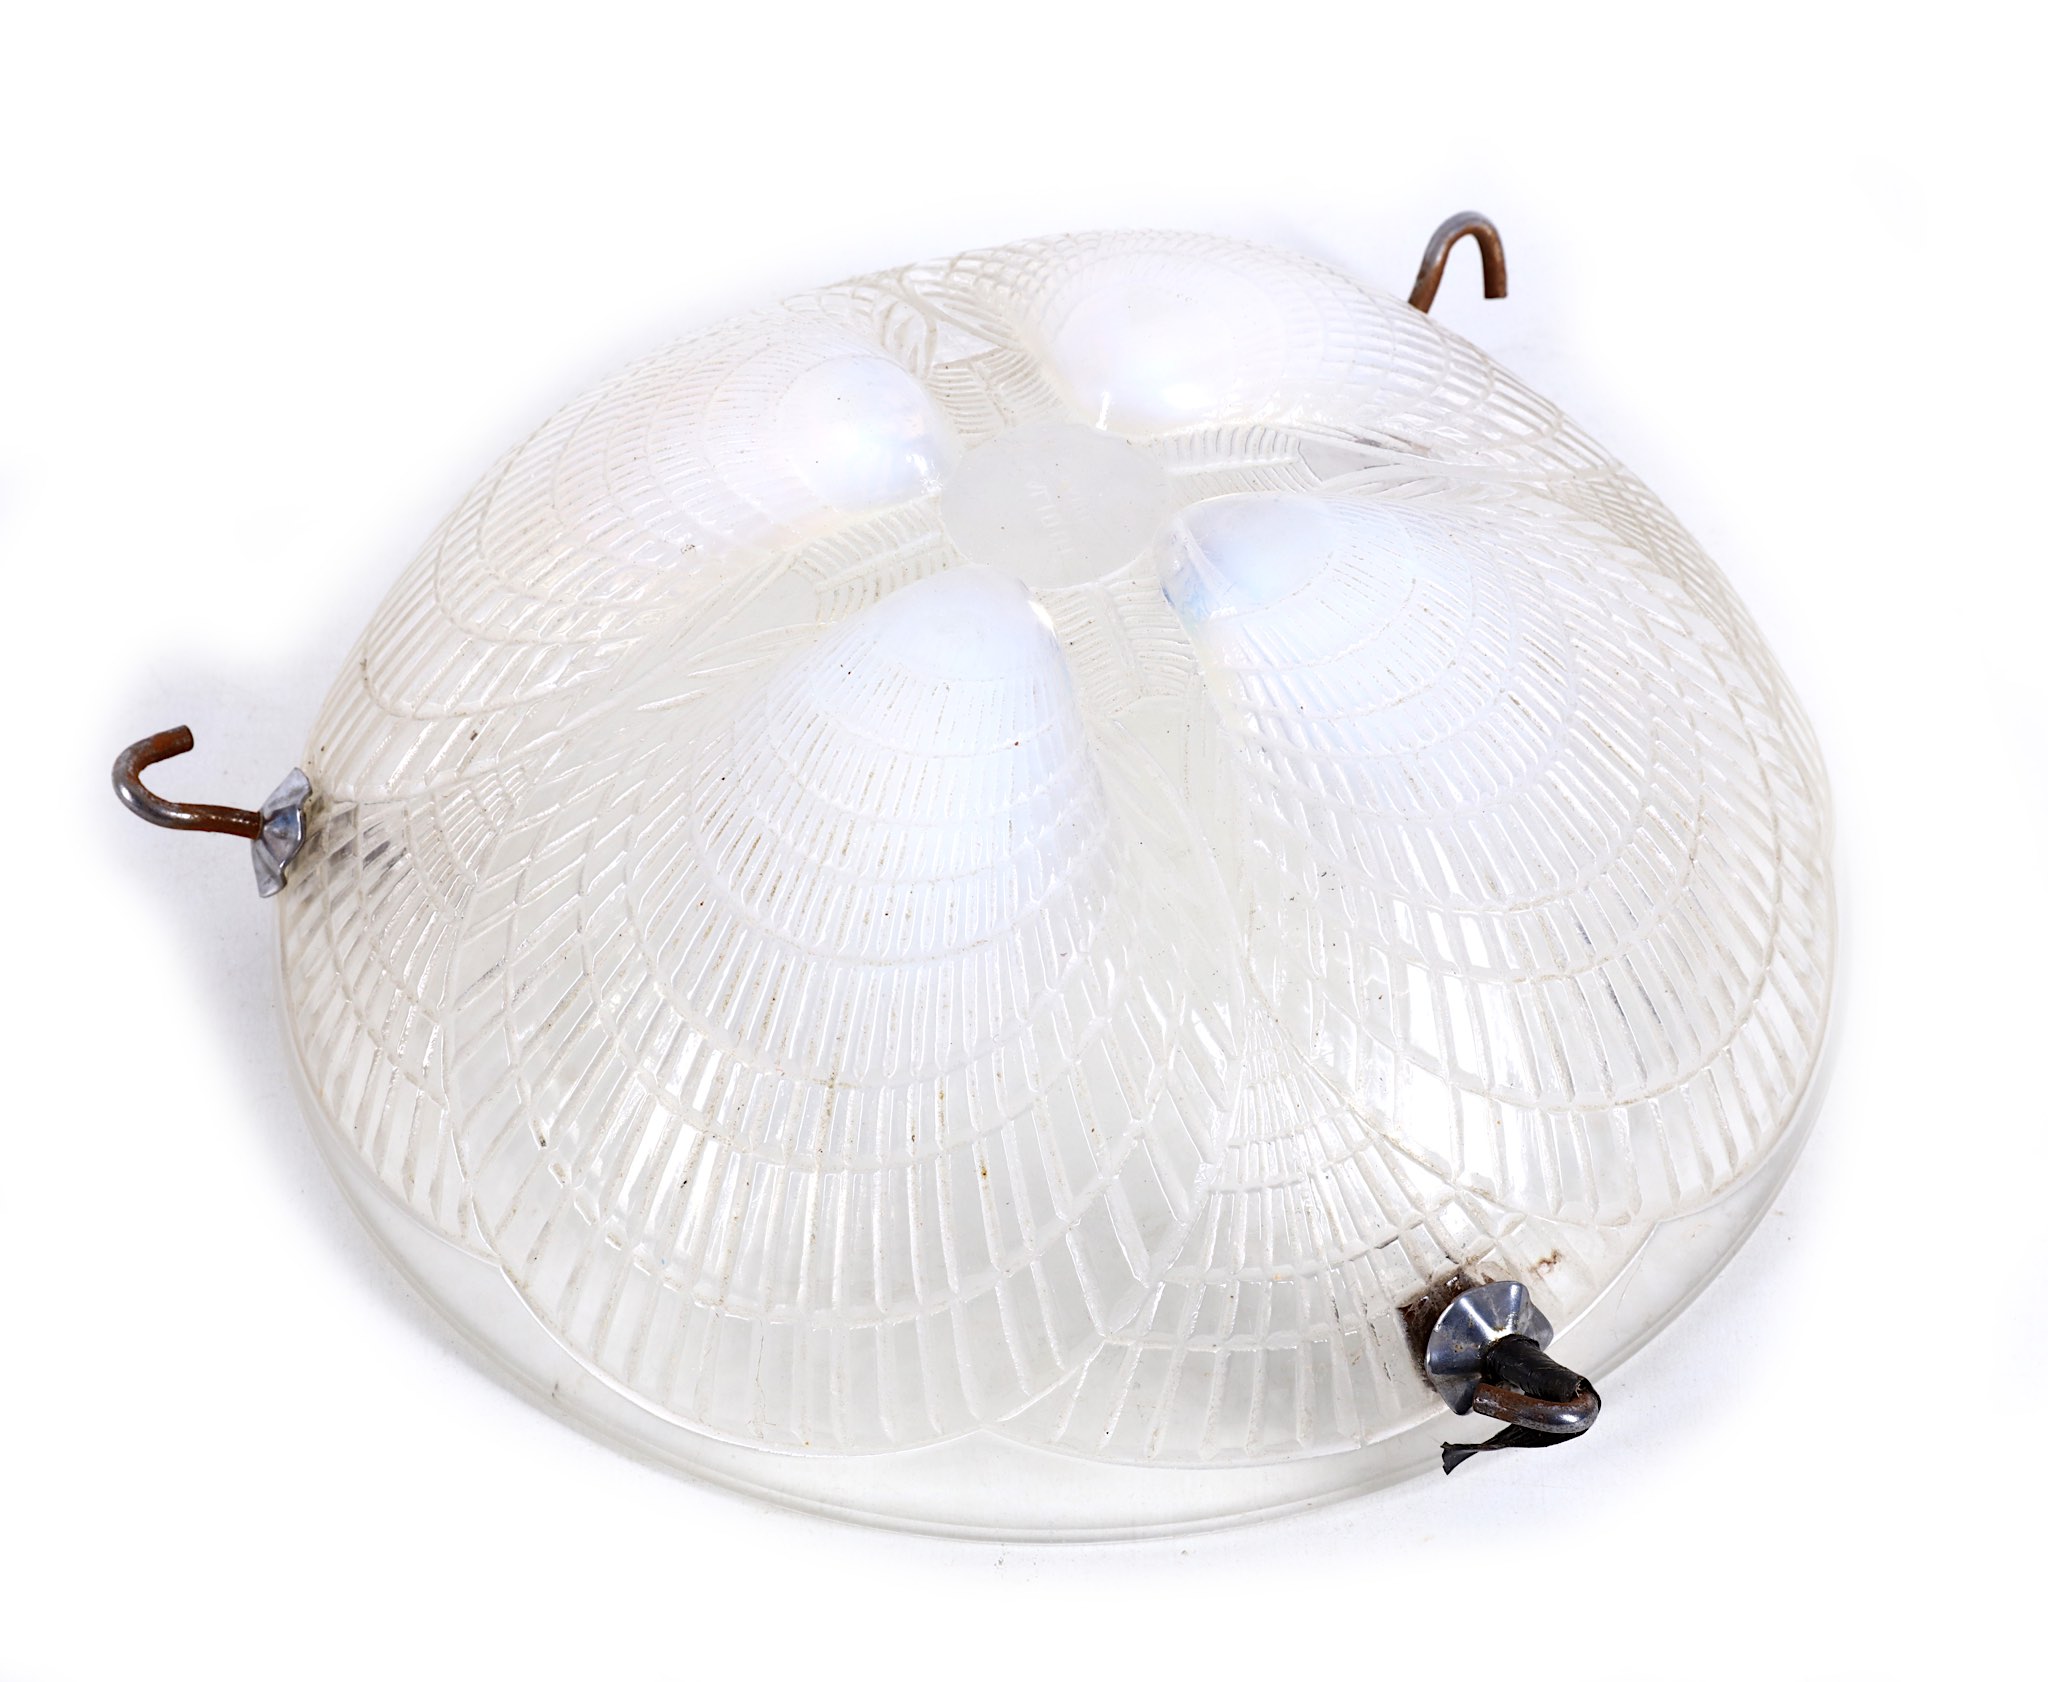 A Rene Lalique opalescent glass 'Coquilles' ceilin